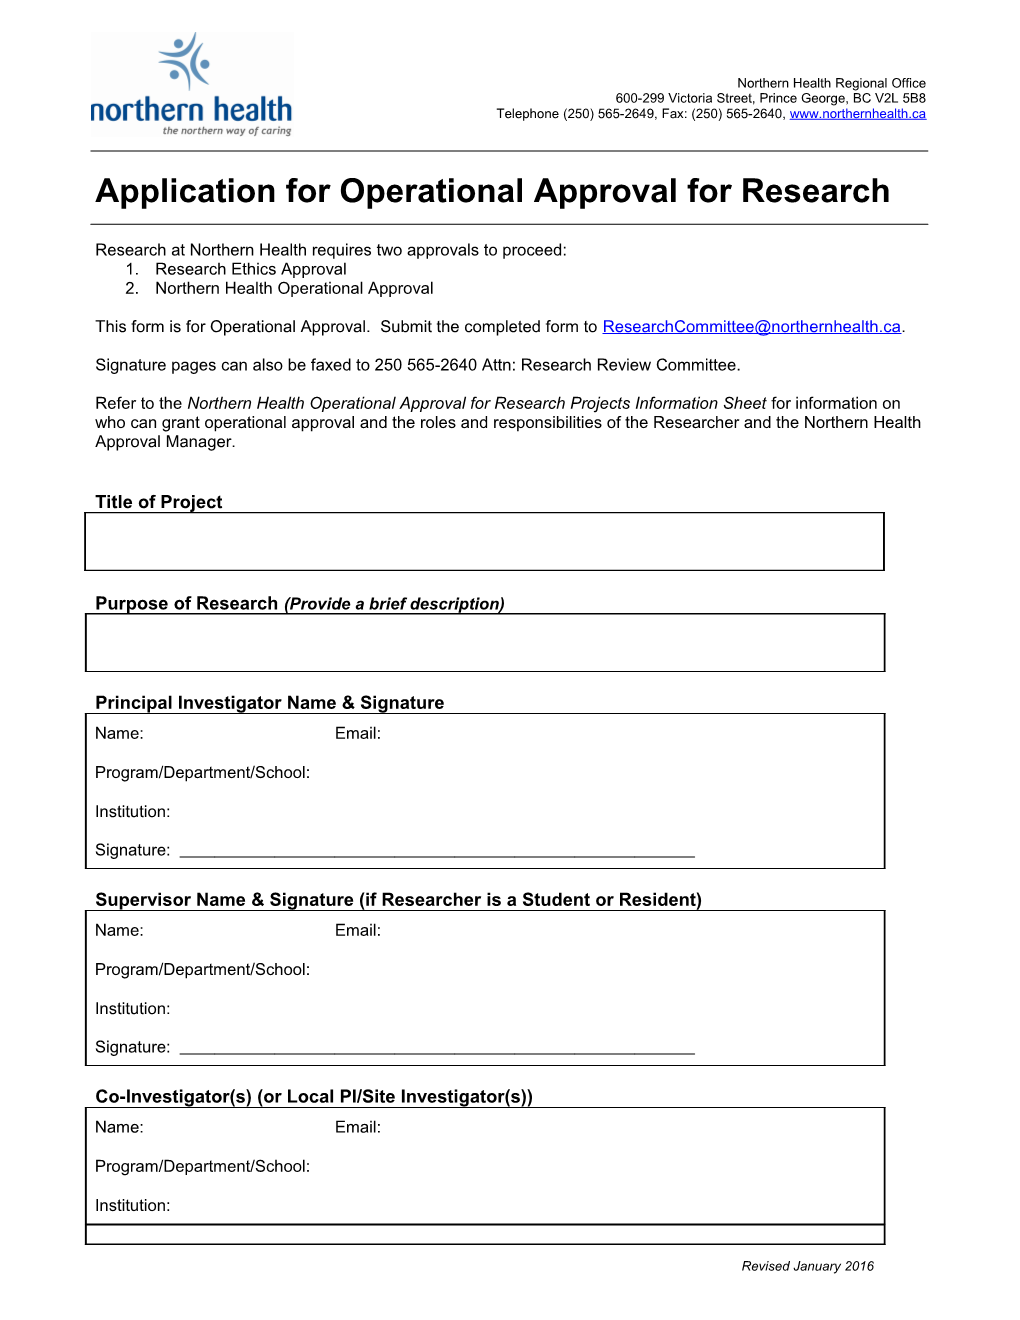 Northern Health Application for Operational Approval for Research